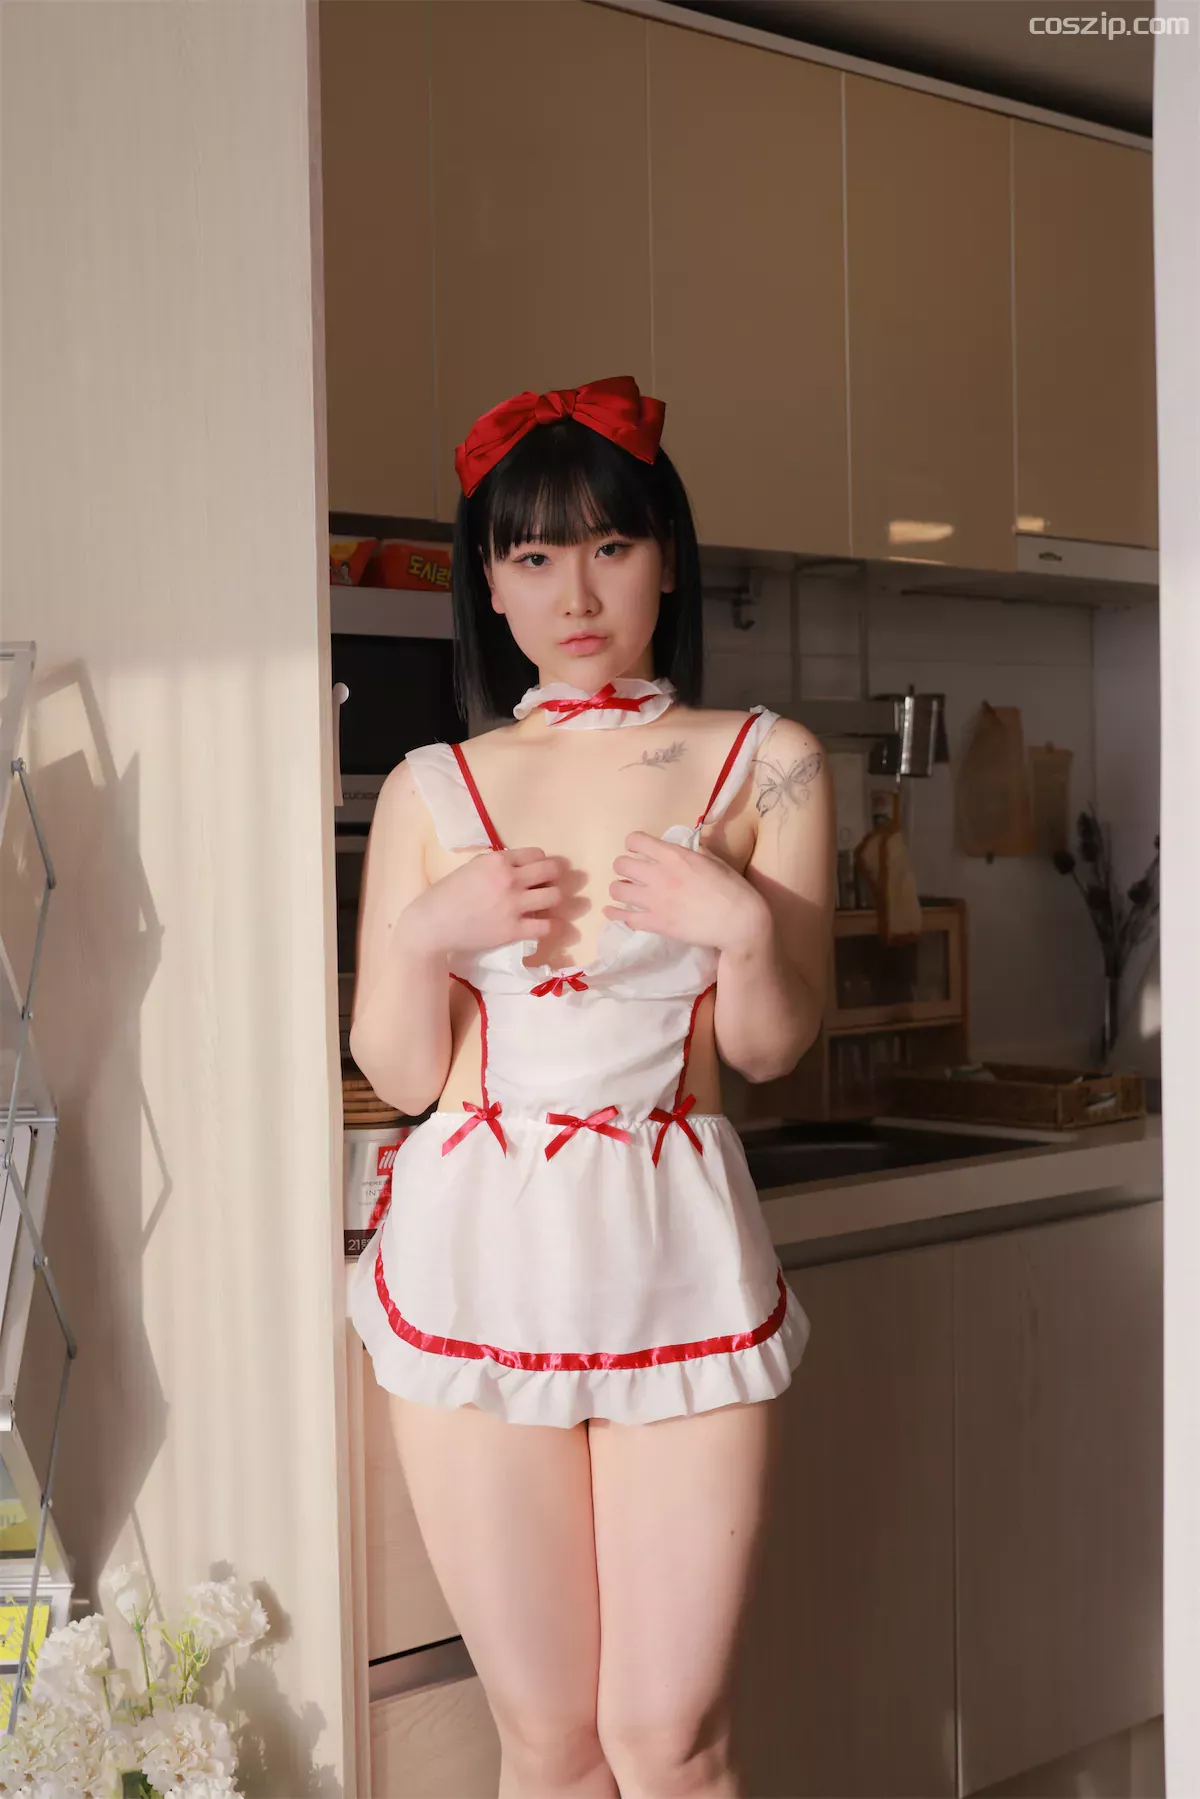 SWEETBOX-YeonJju-Vol.31-Home-Alone-coszip.com-063